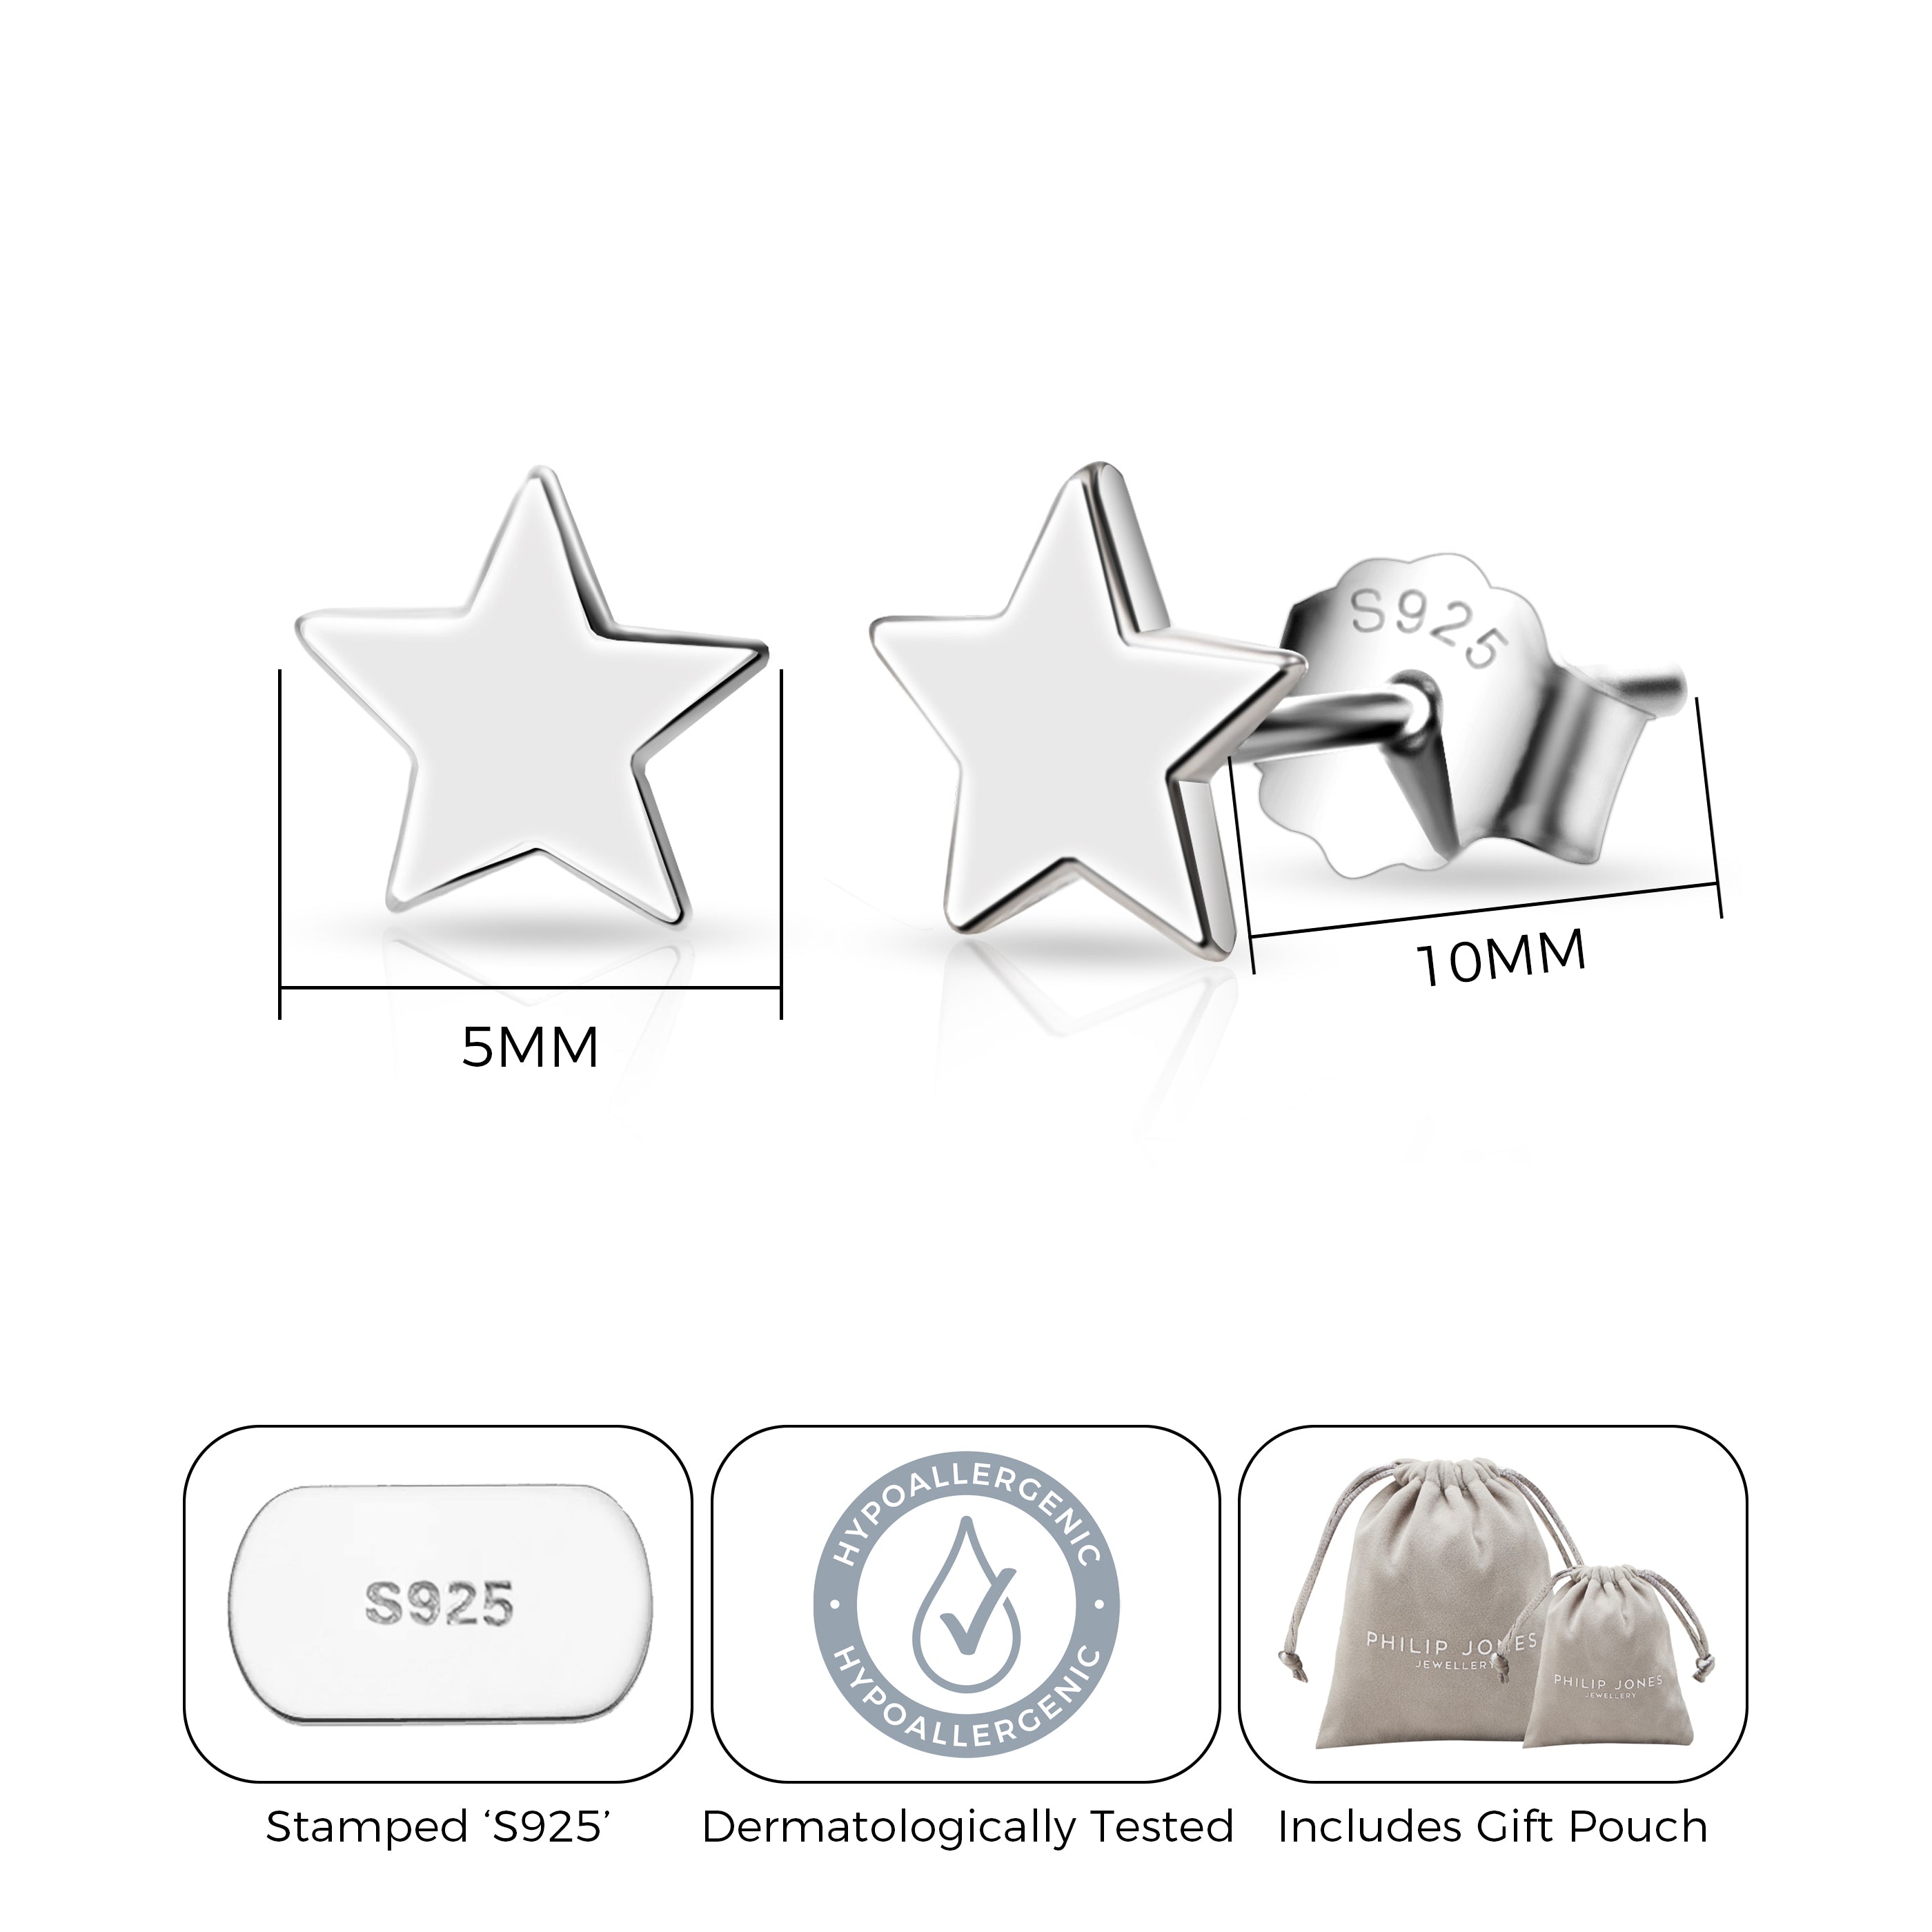 Sterling Silver Friendship Quote Star Earrings